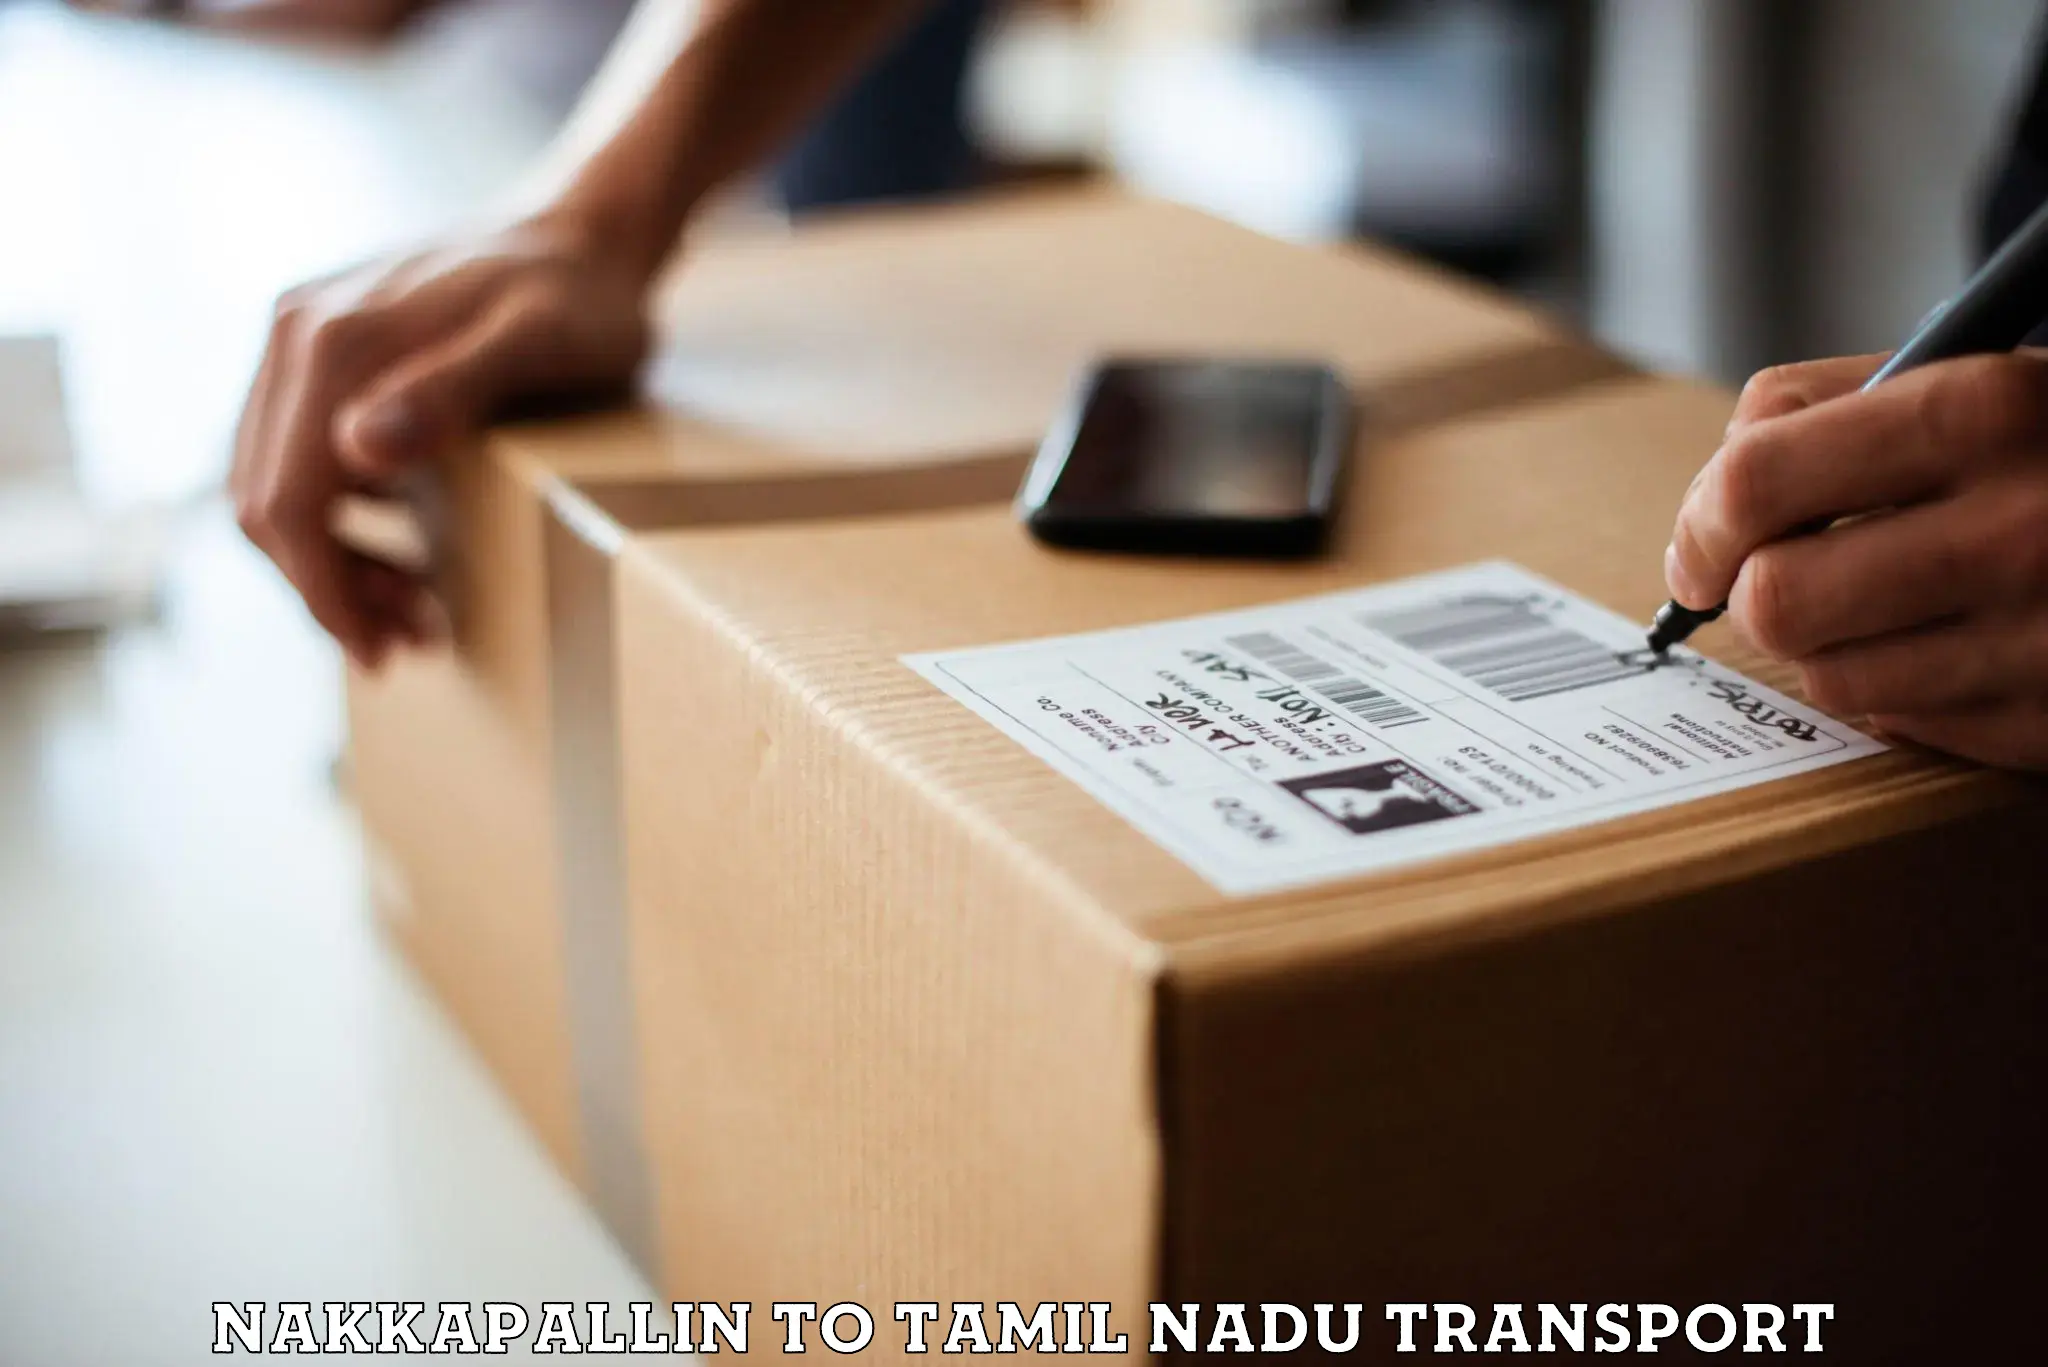 Land transport services Nakkapallin to Shanmugha Arts Science Technology and Research Academy Thanjavur